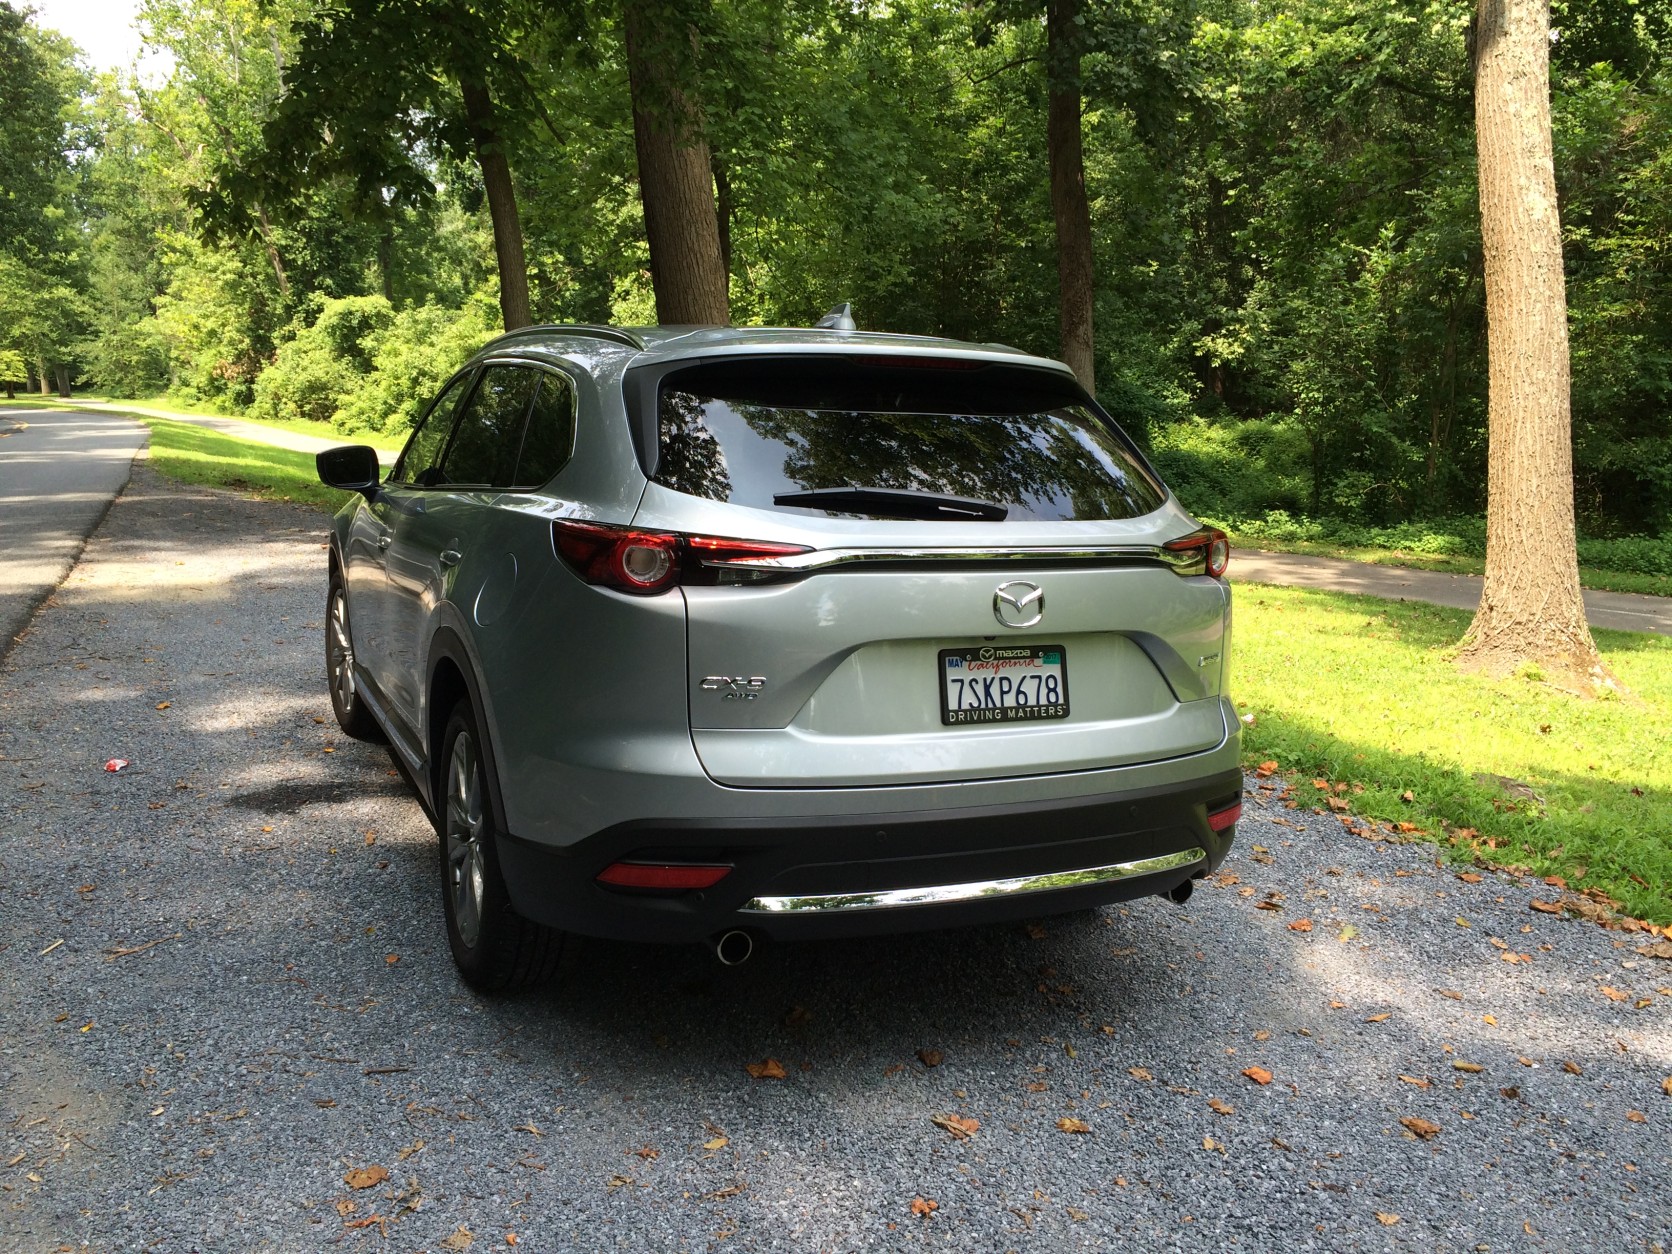 The rear of the Mazda CX-9 departs from the usual boring look with dual exhaust pipes and the different trim colors, and the bumper has some tasteful chrome accents. (WTOP/Mike Parris)